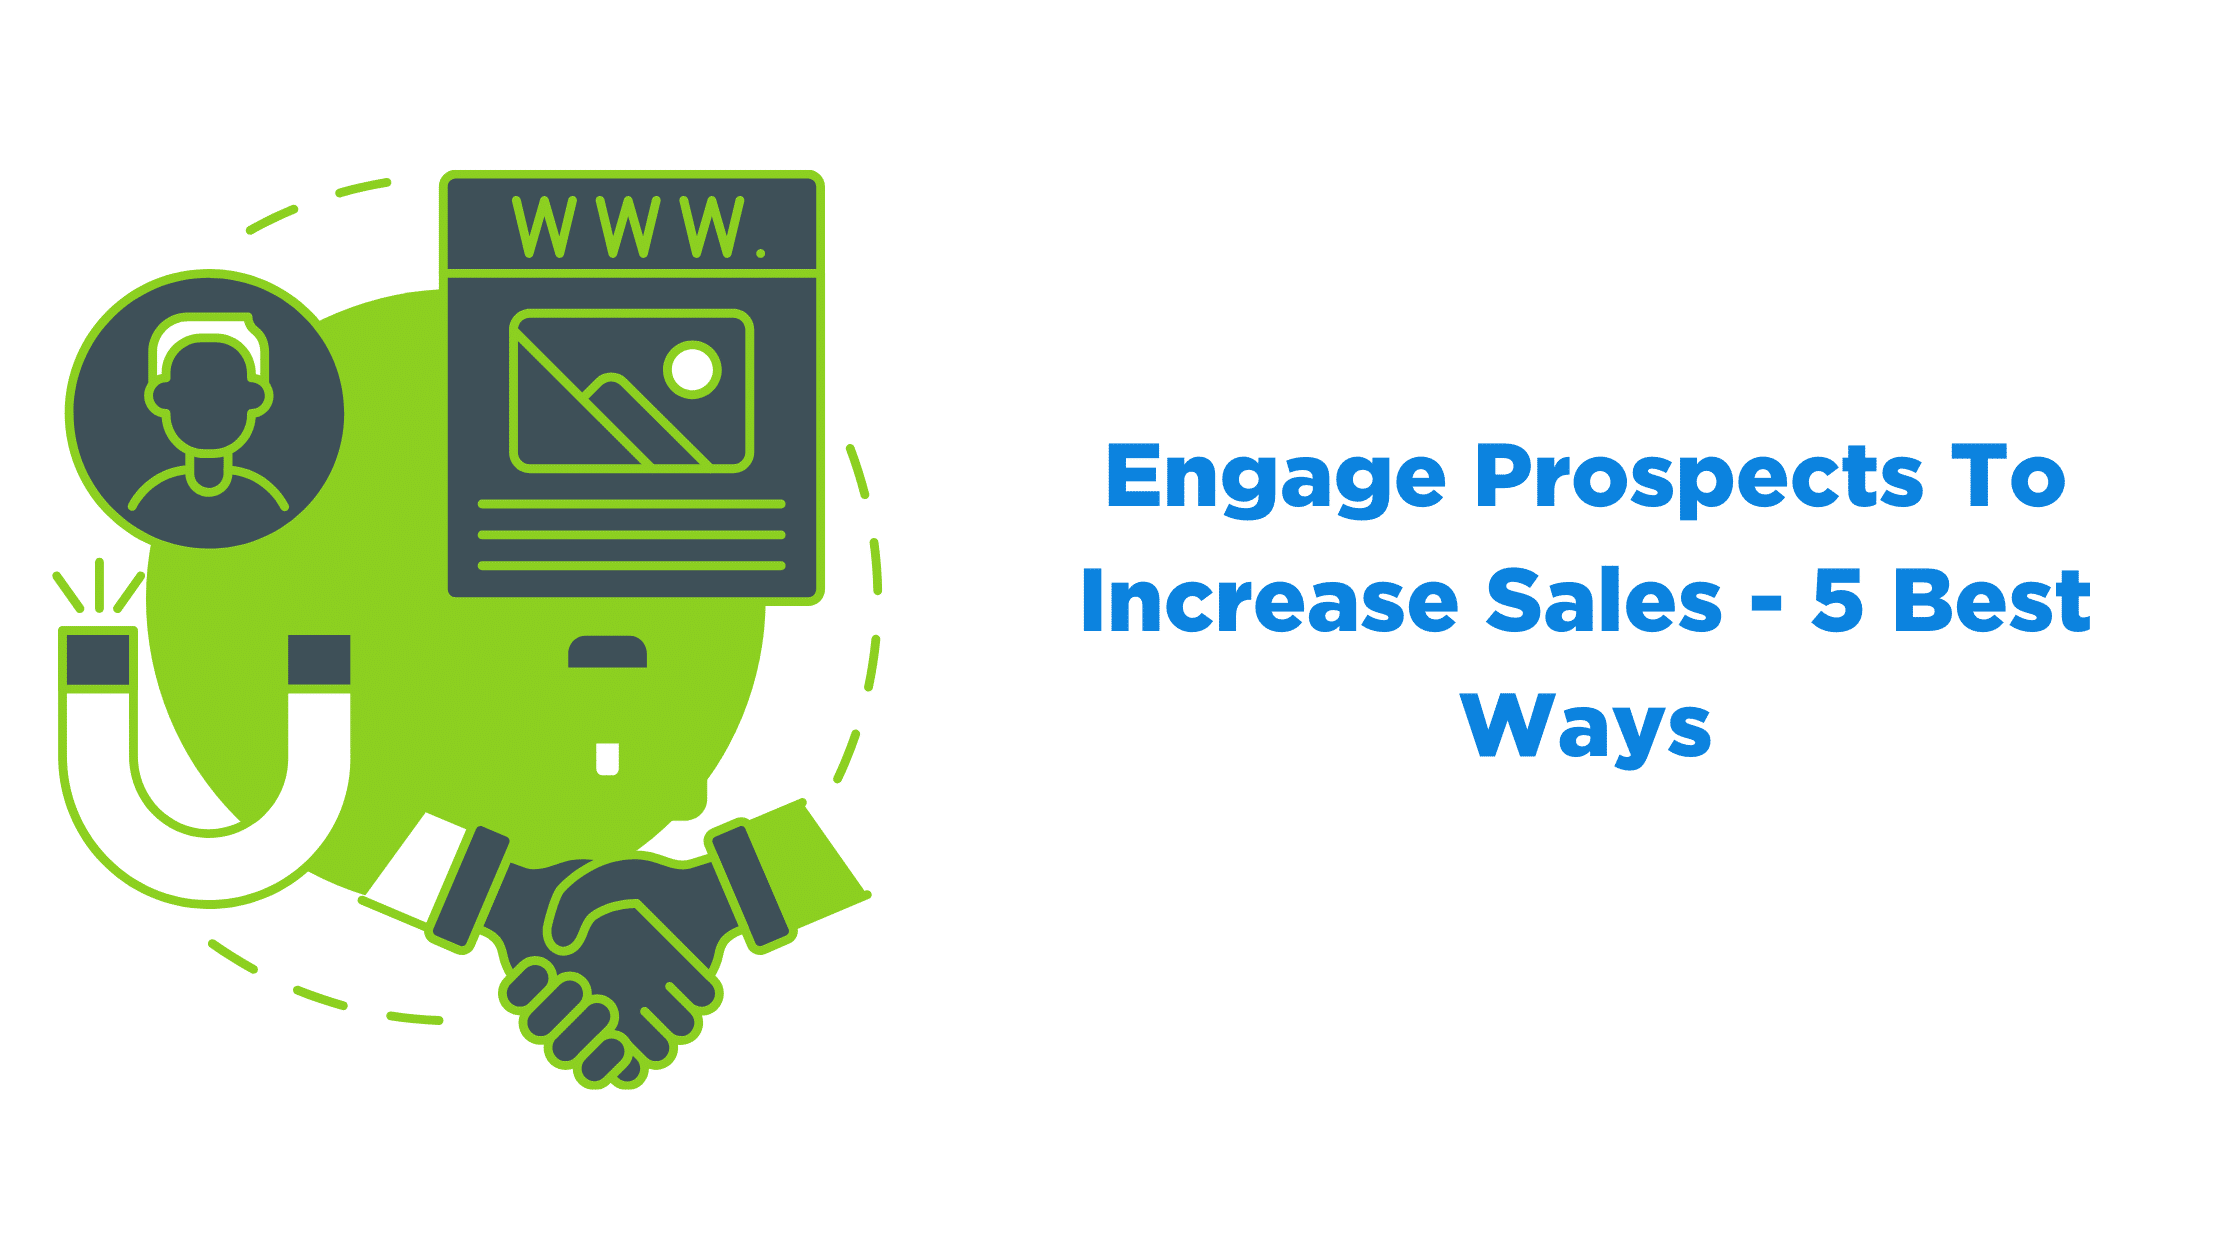 Engage Prospects To Increase Sales - 5 Best Ways